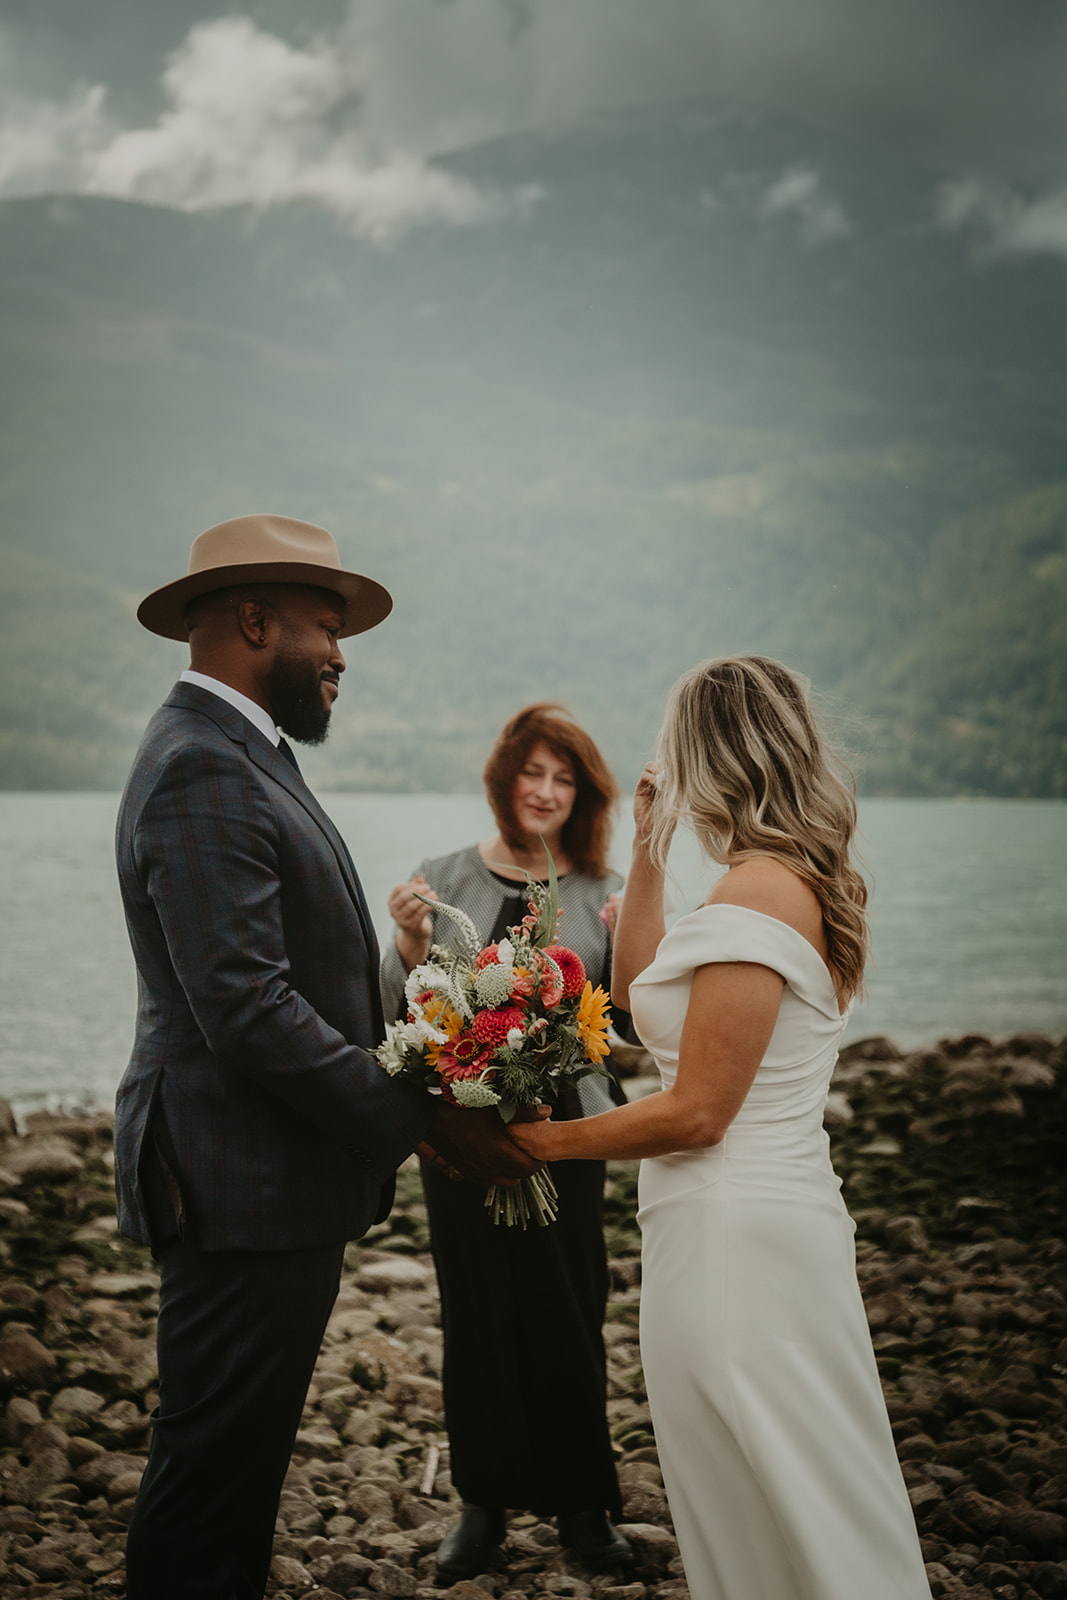 wedding officiant cost, young hip and married vancouver elopement